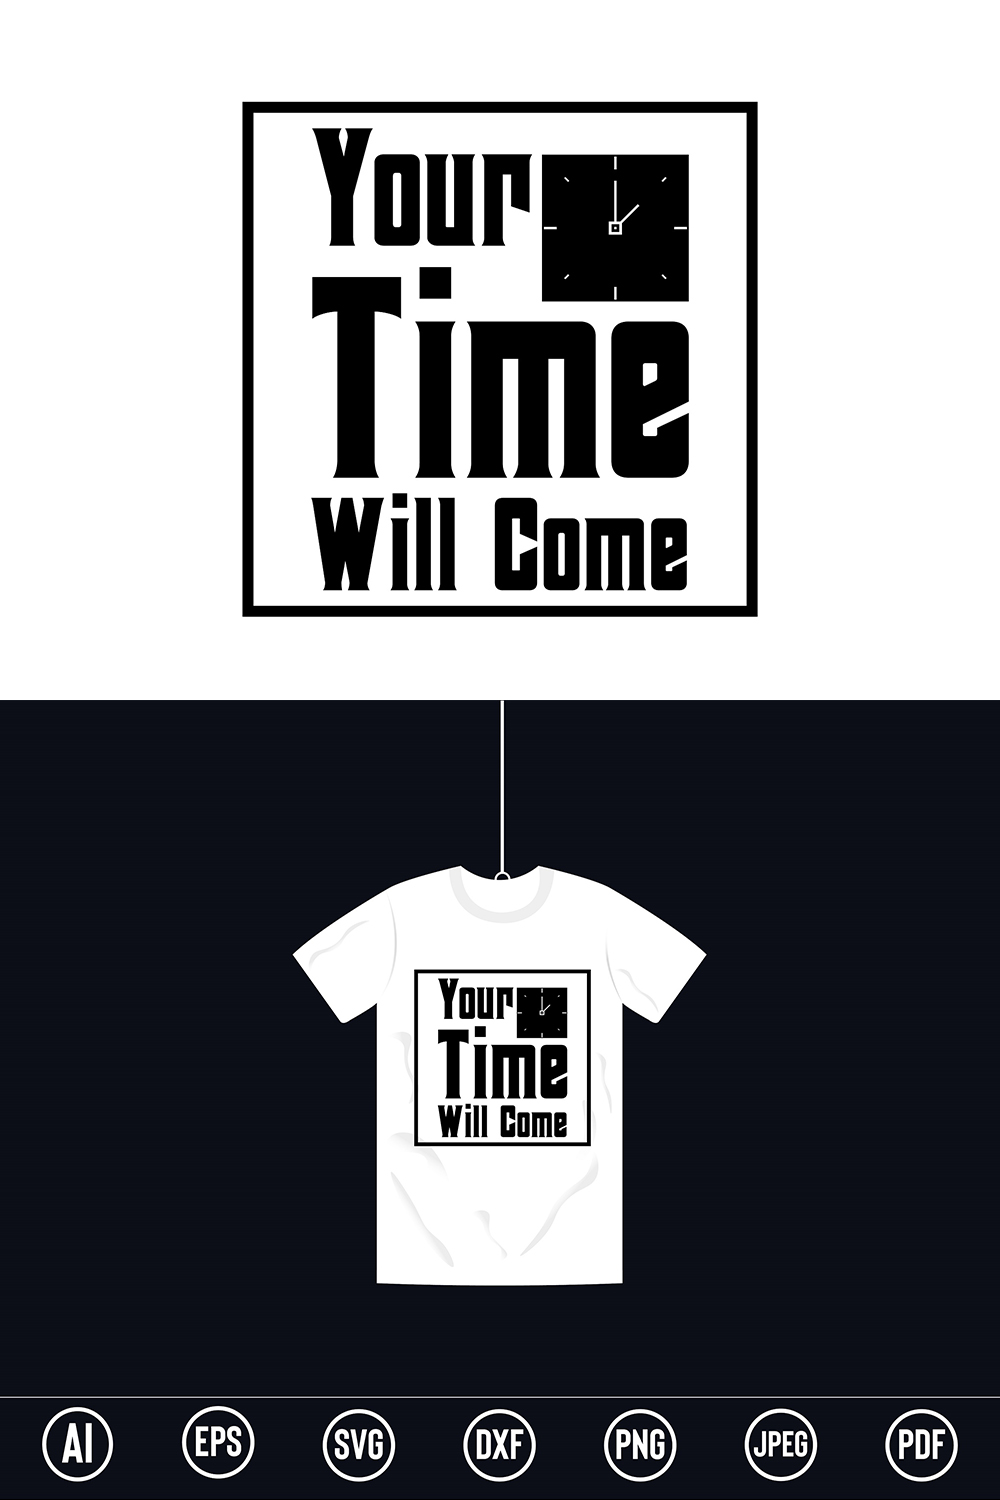 Modern Typography T-Shirt design with “Your Time will come” quote for t-shirt, posters, stickers, mug prints, banners, gift cards, labels etc pinterest preview image.